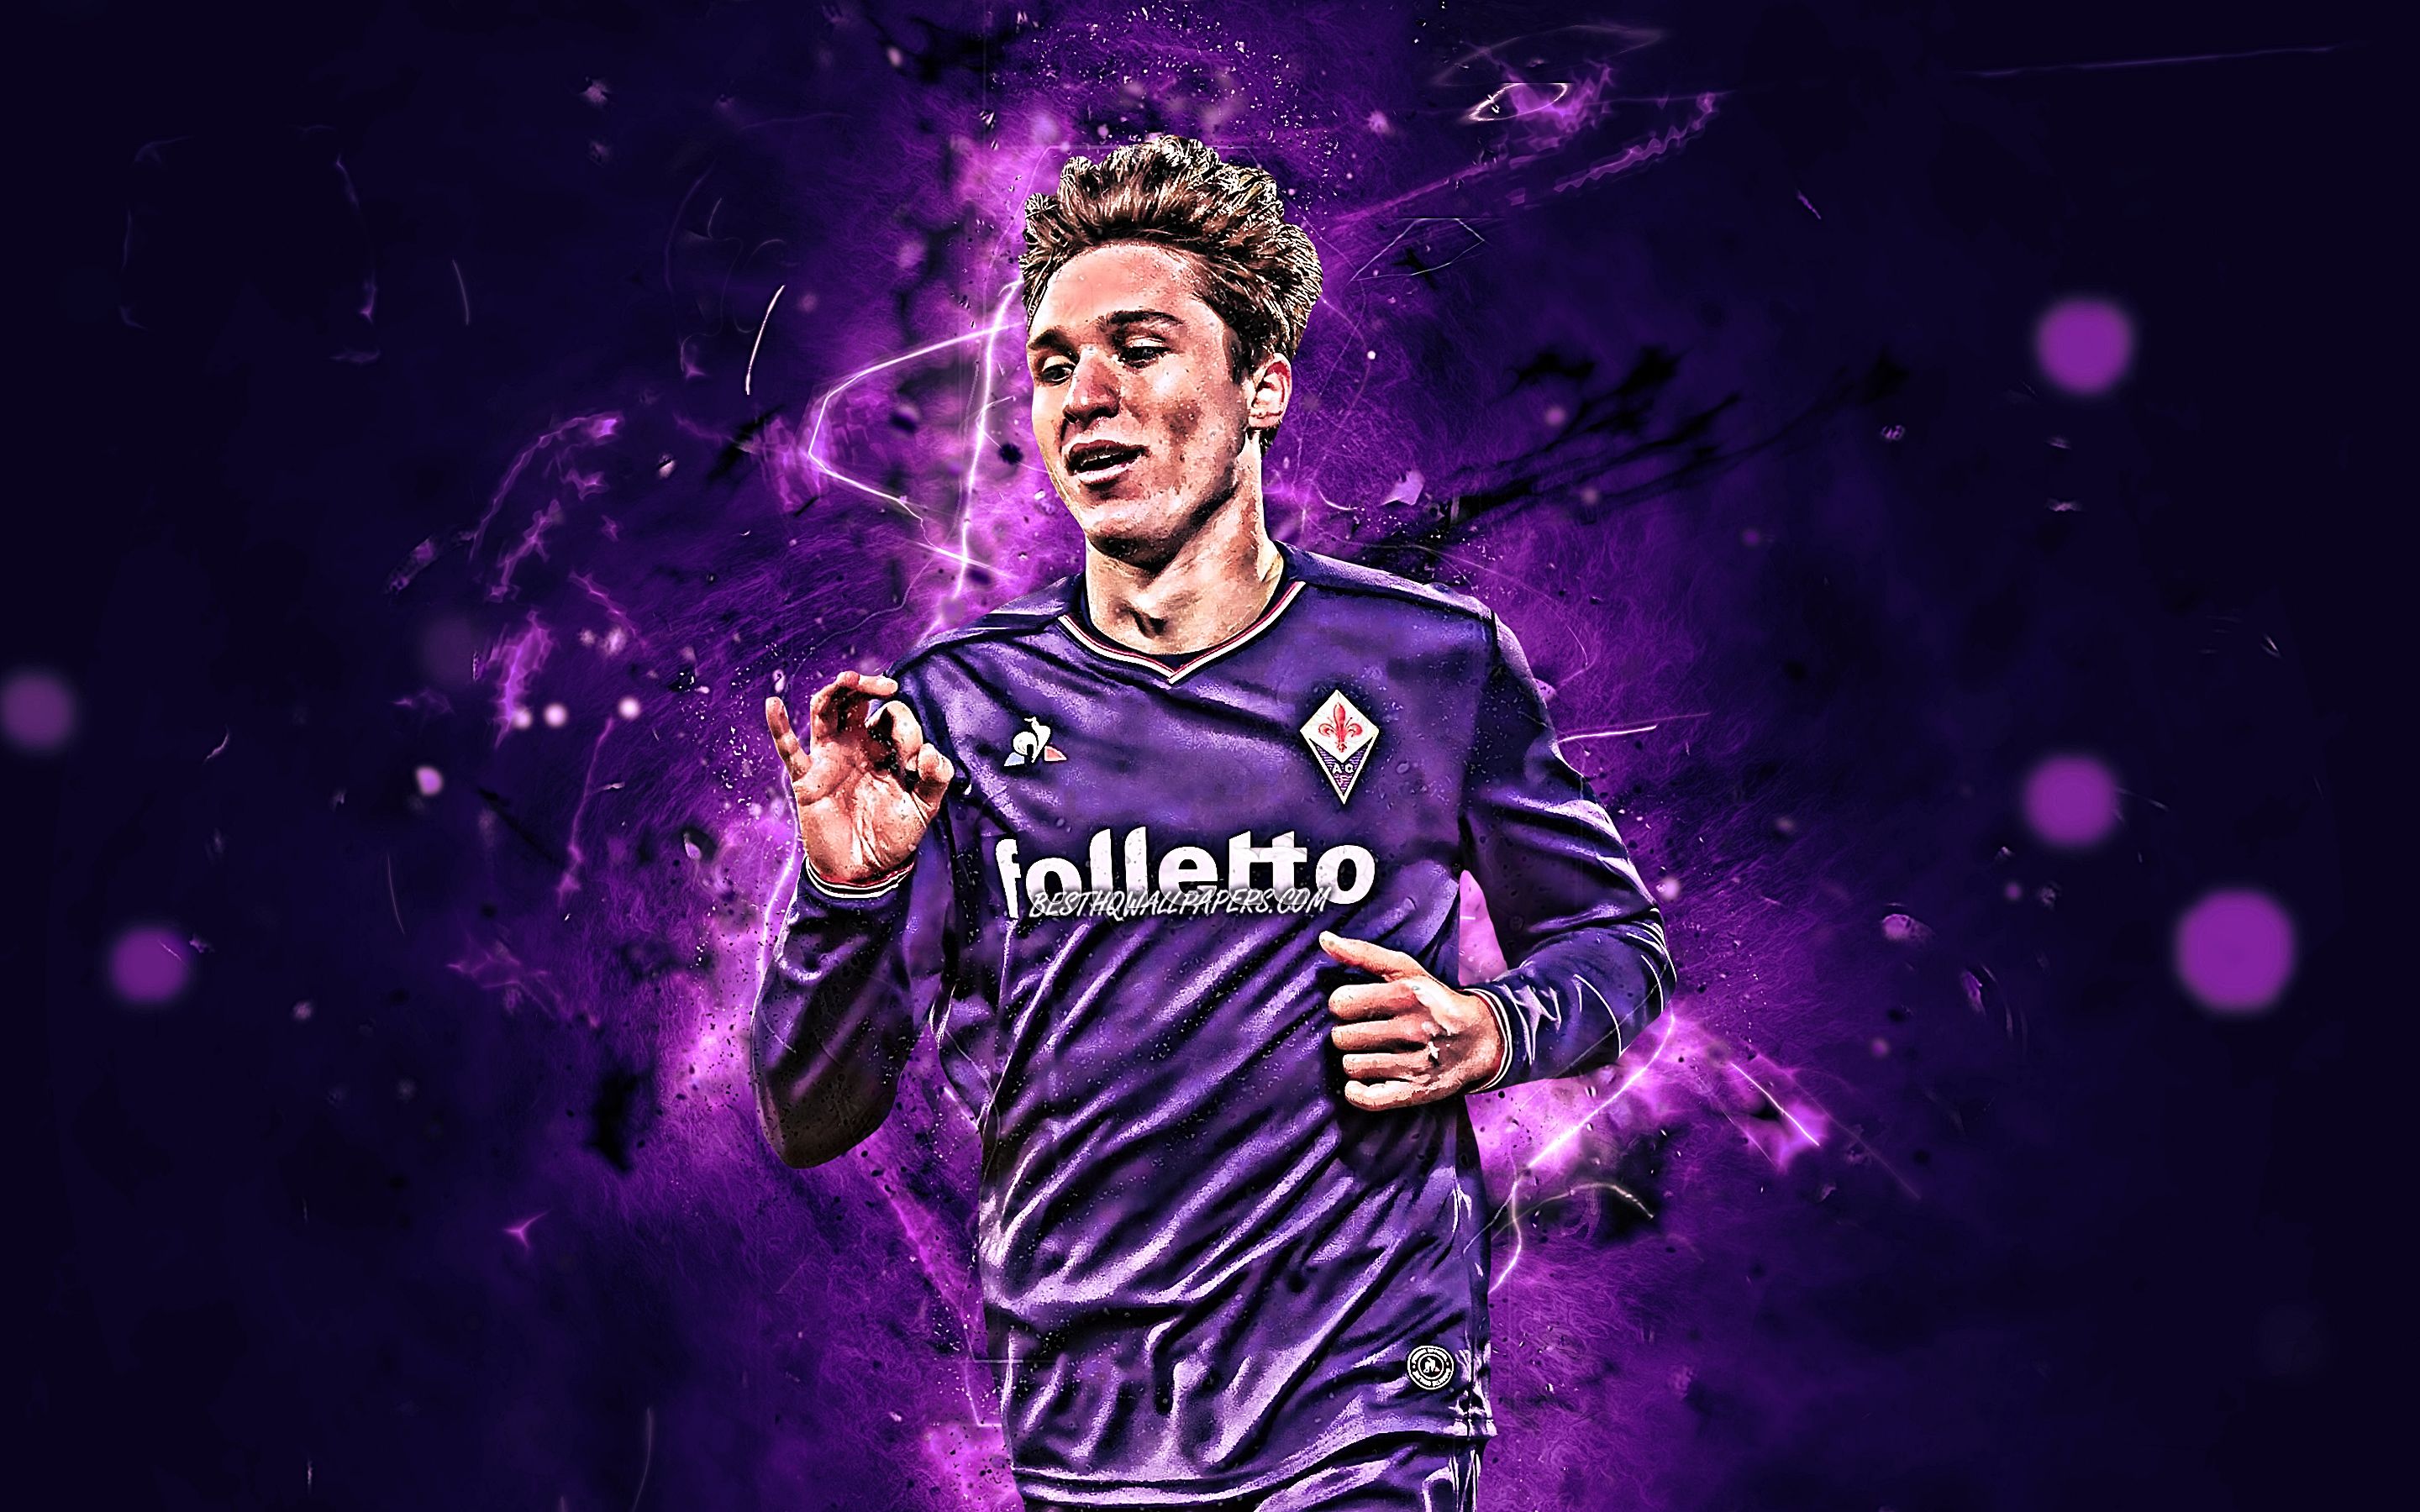 Download wallpaper Federico Chiesa, italian footballers, Fiorentina FC, goal, soccer, Serie A, Chiesa, football, neon lights, Italy, abstract art for desktop with resolution 2880x1800. High Quality HD picture wallpaper